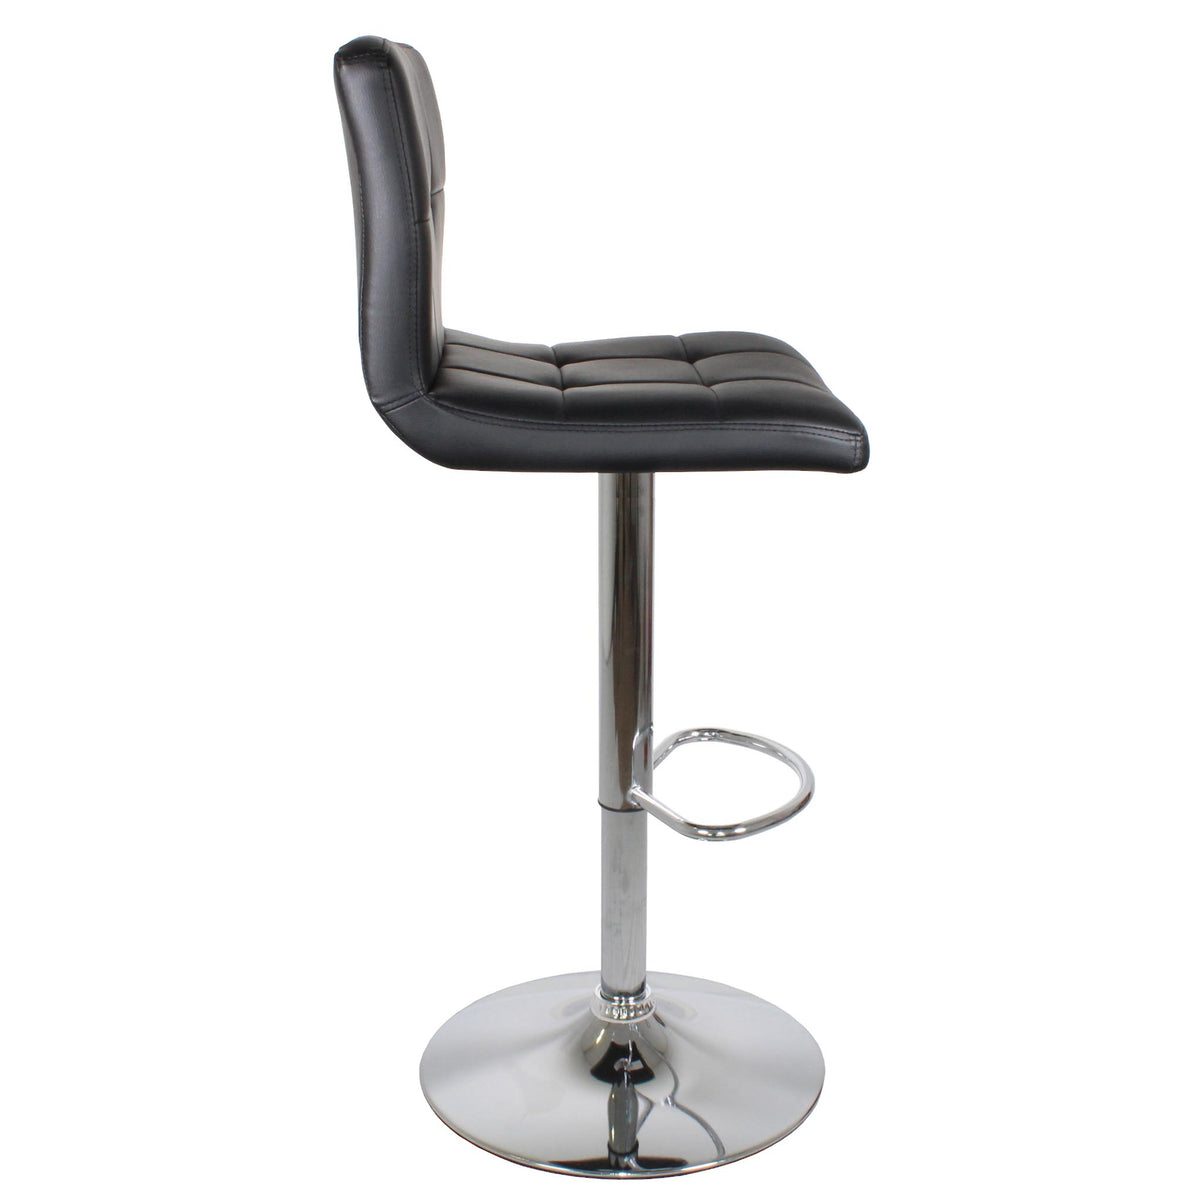 side view of the Shadow Grey Elton Adjustable Breakfast Bar Stool with silver base